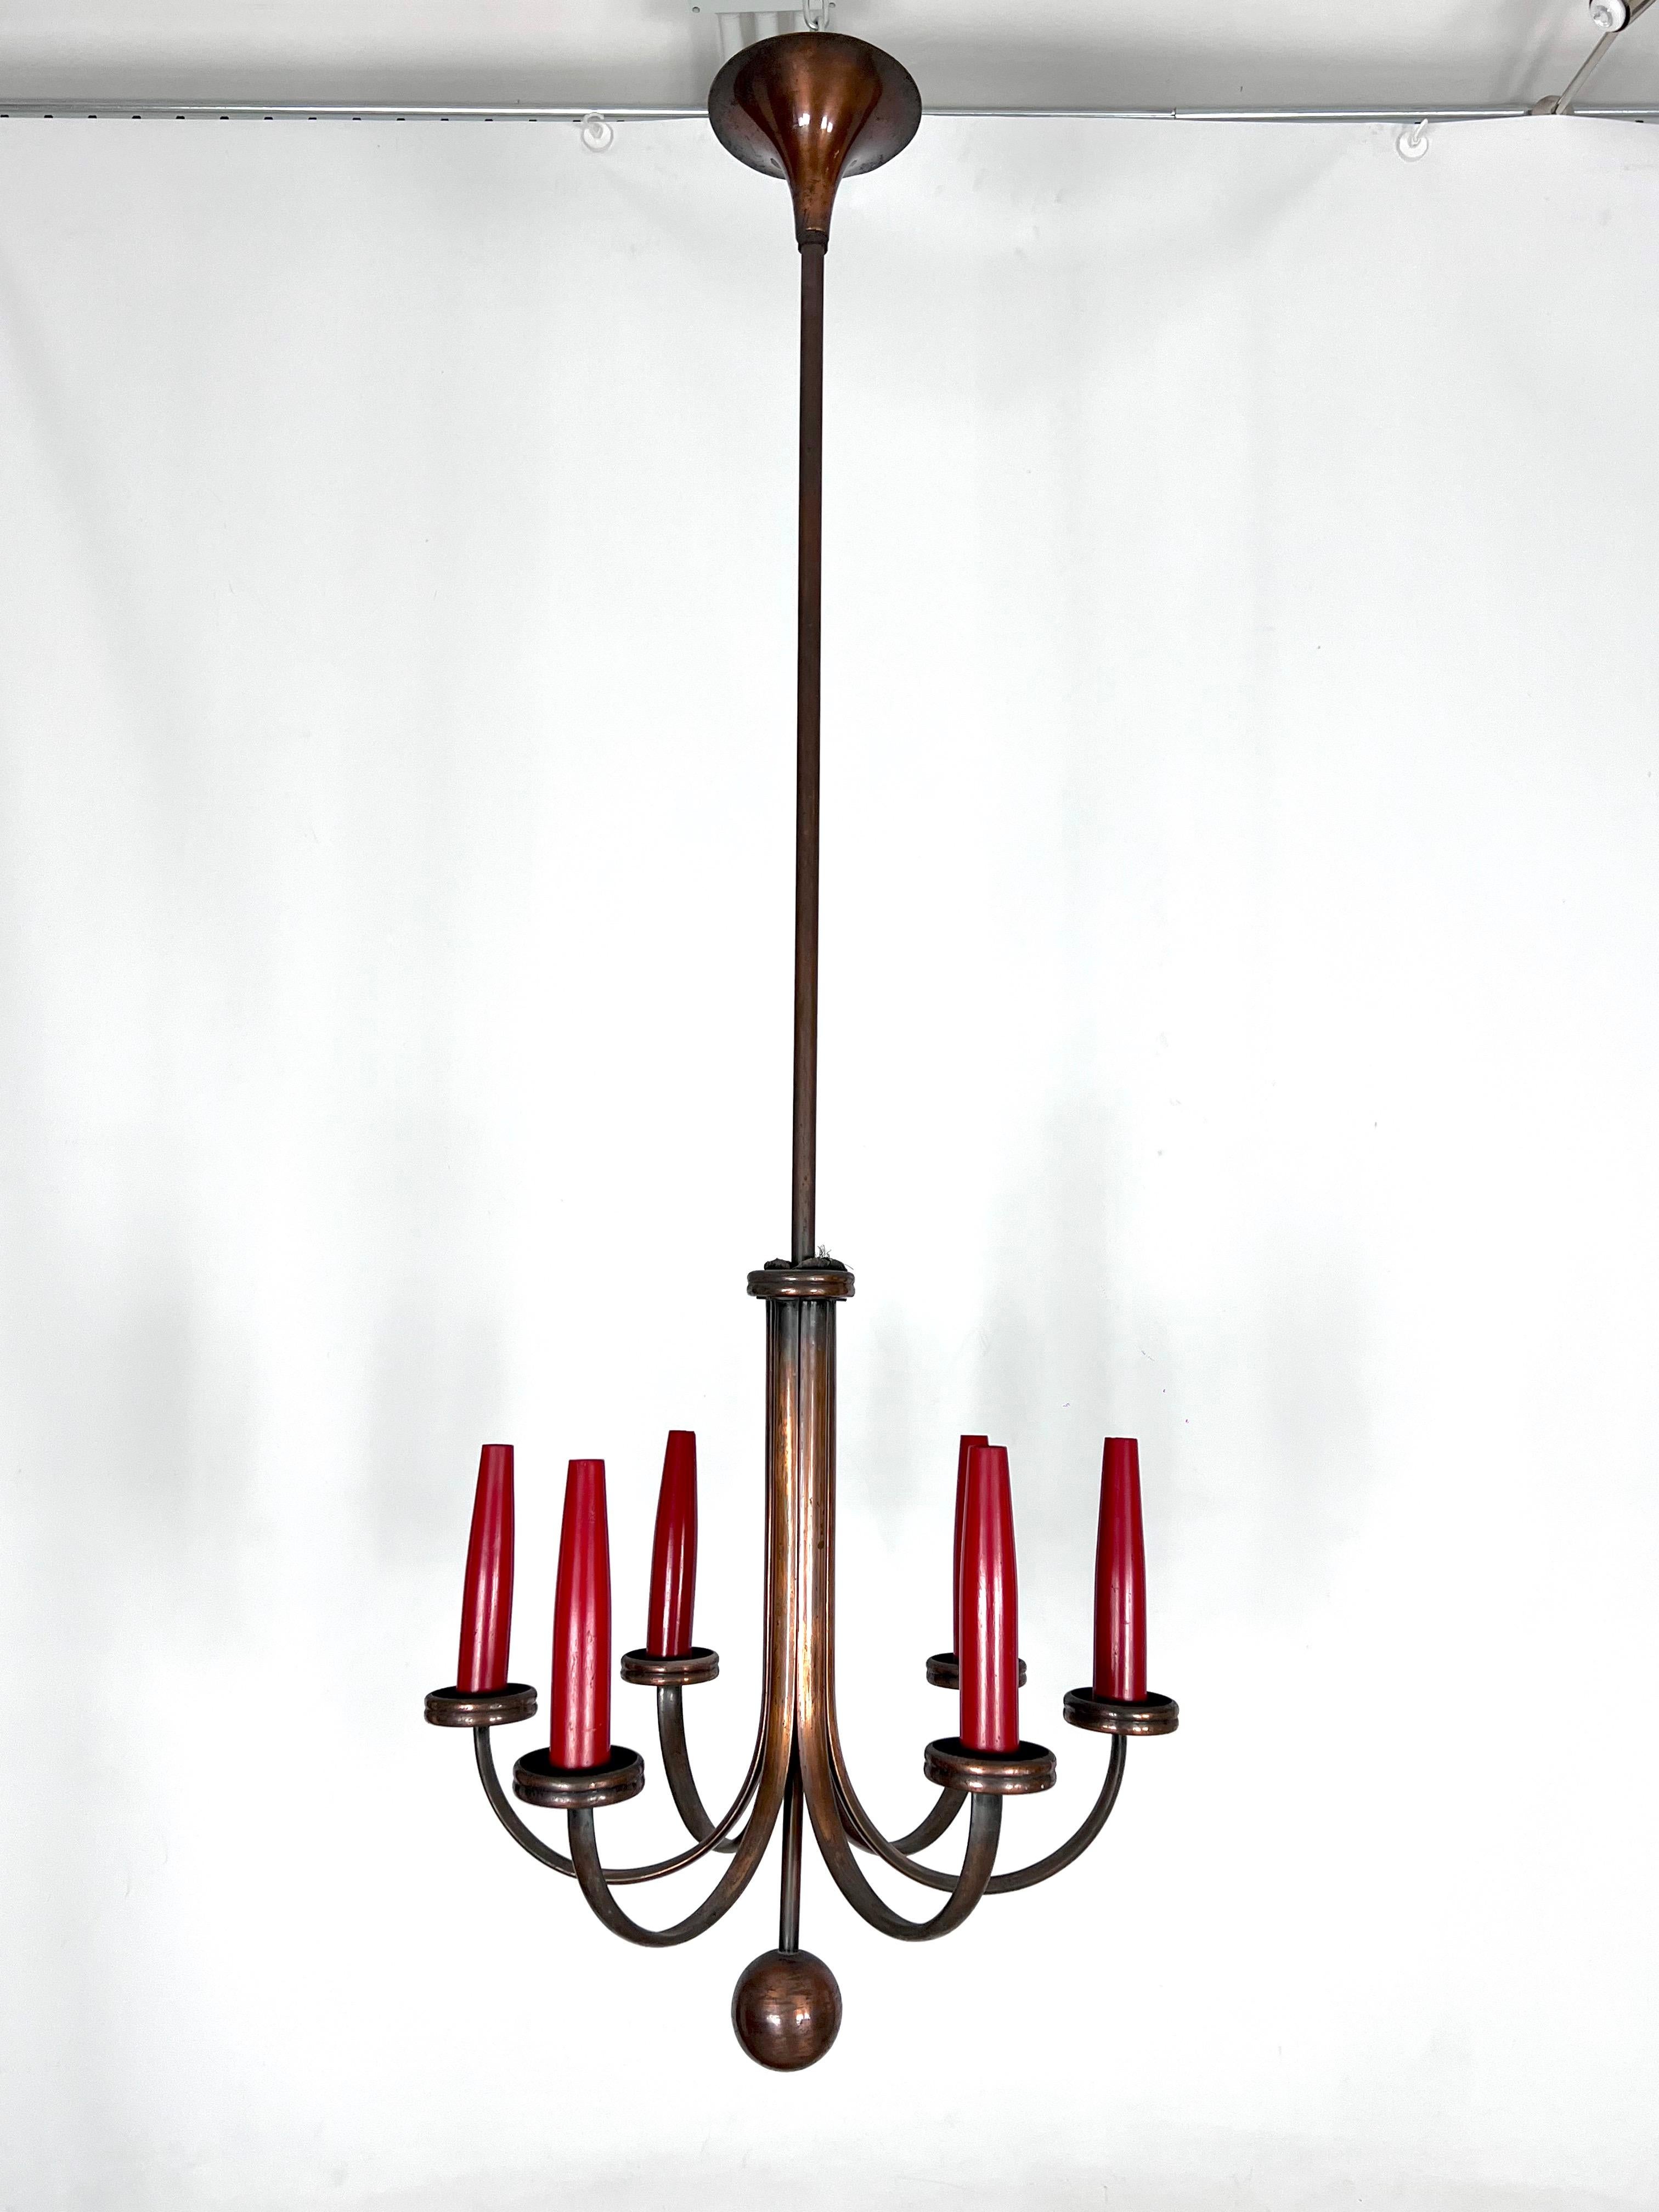 Andorran Mid-Century Modern Six Arms Copper Chandelier in Gio Ponti Style, Italy 1950s For Sale